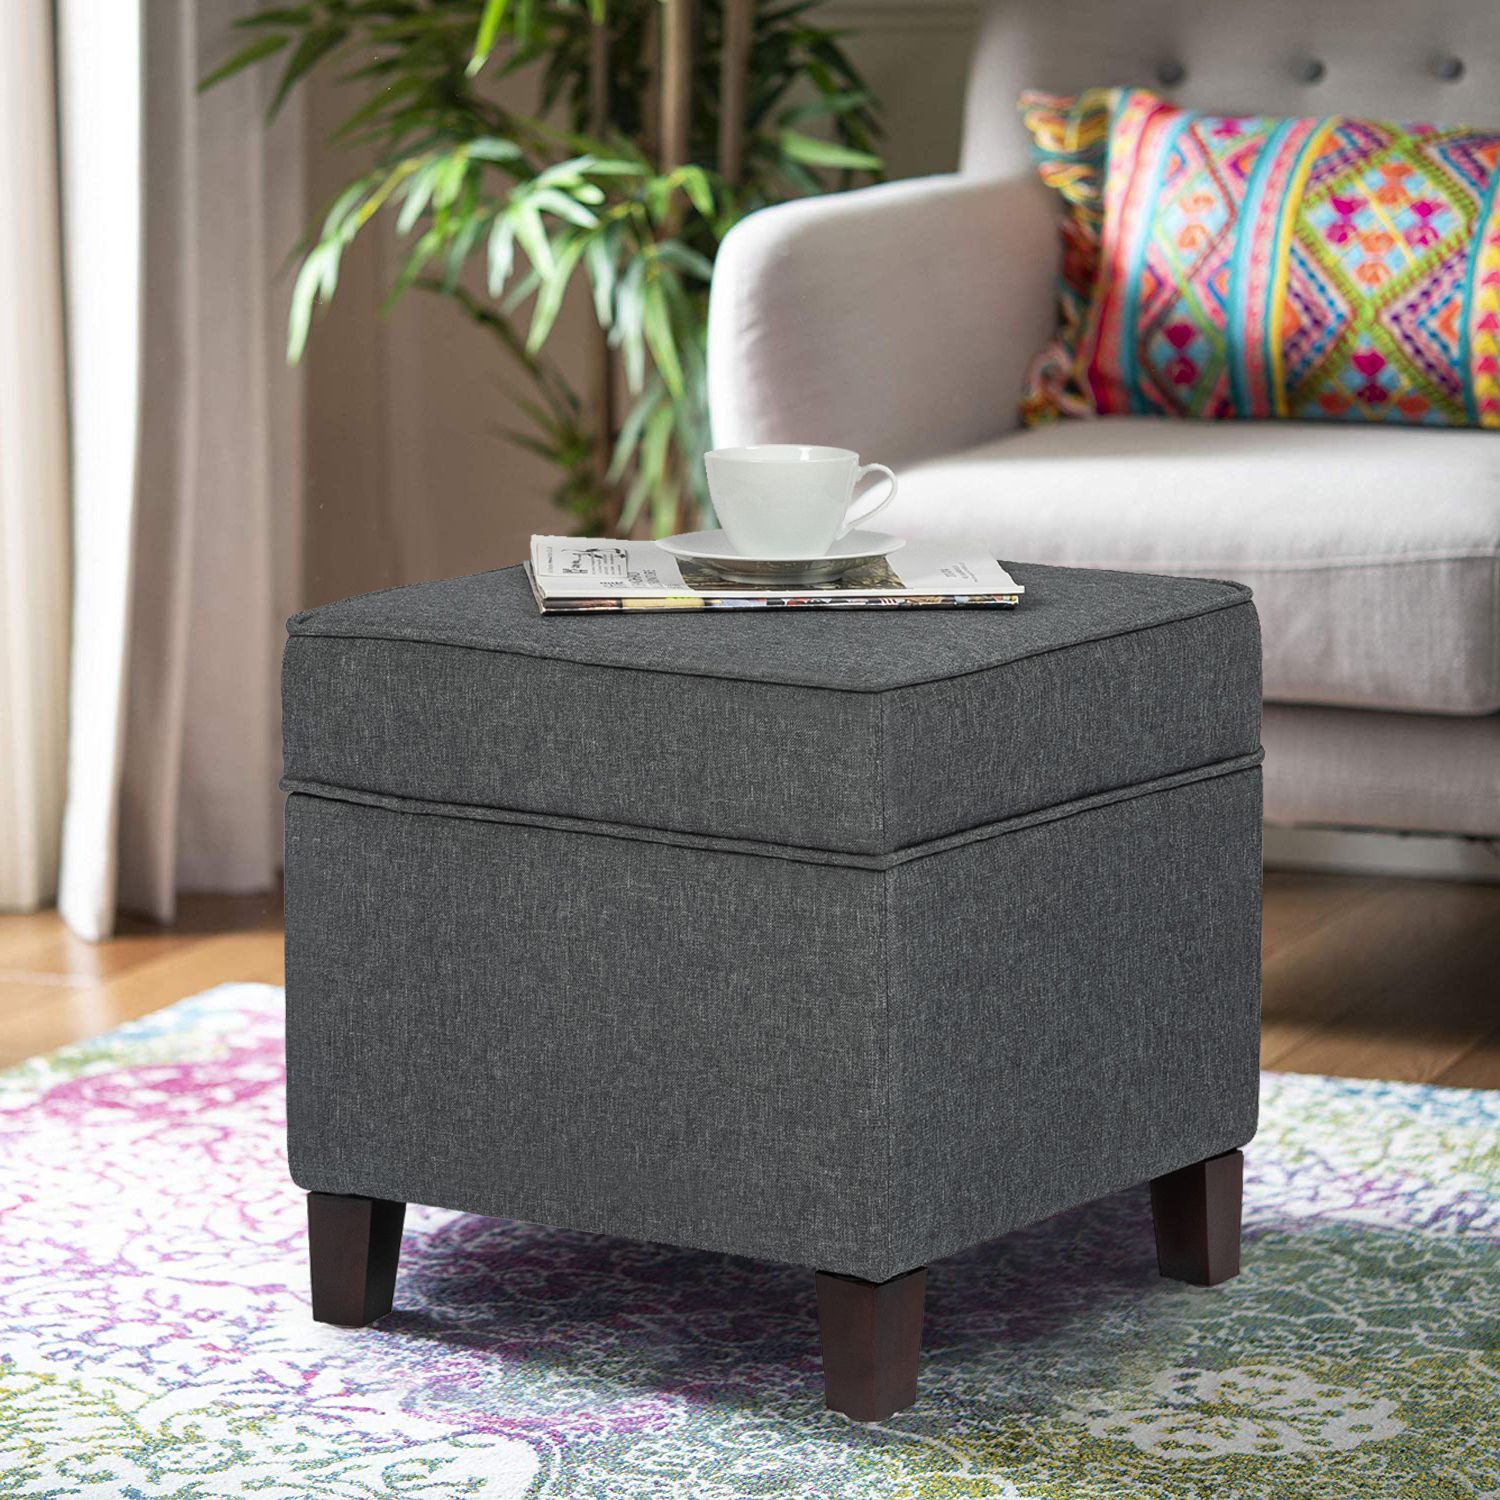 Most Current Joveco Modern Design Fabric Square Storage Ottoman With Hinge Hidden Inside Gray Fabric Oval Ottomans (View 2 of 10)